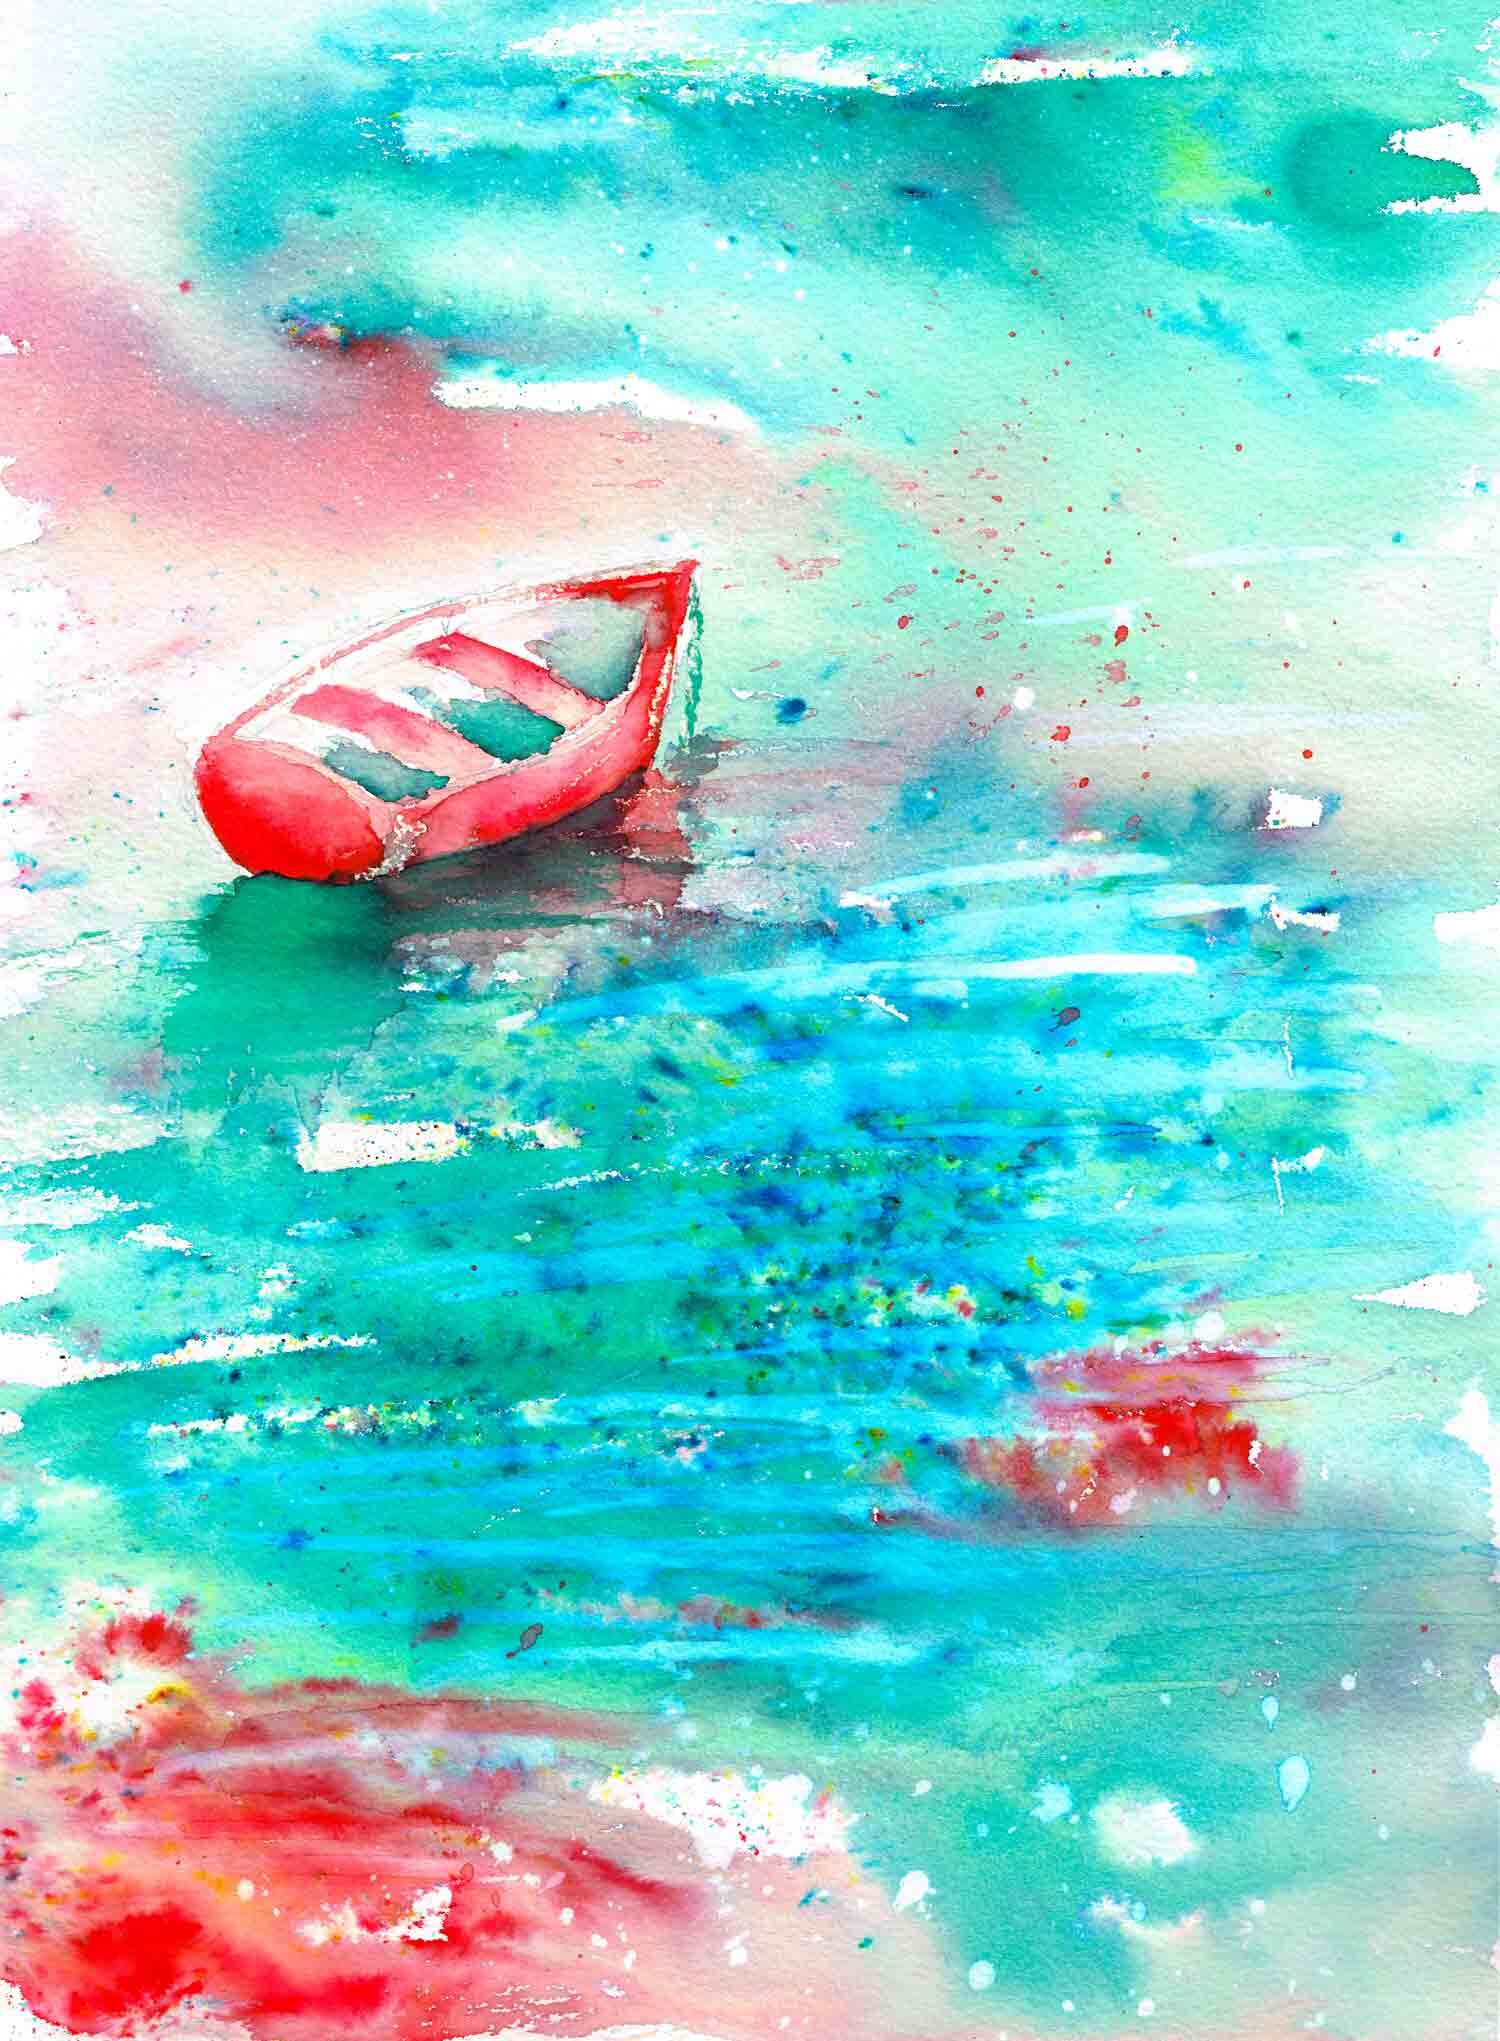 Messing-about-in-boats-no-1-Little-Red-Boat.jpg